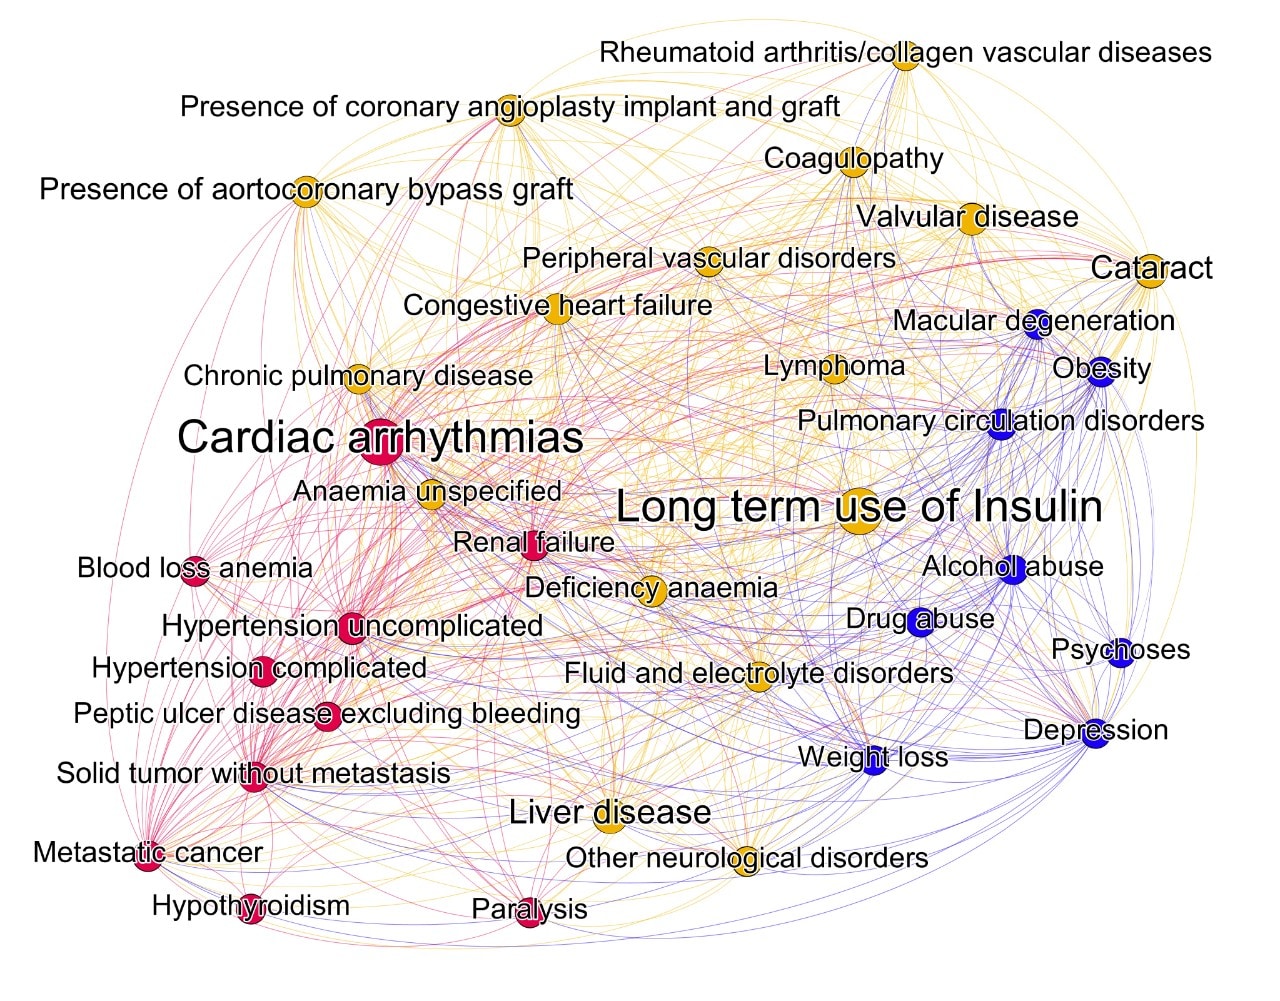 A visual representation of the network modelling the relative prevalence of T2D. Image courtesy: International Journal of Medical Informatics.